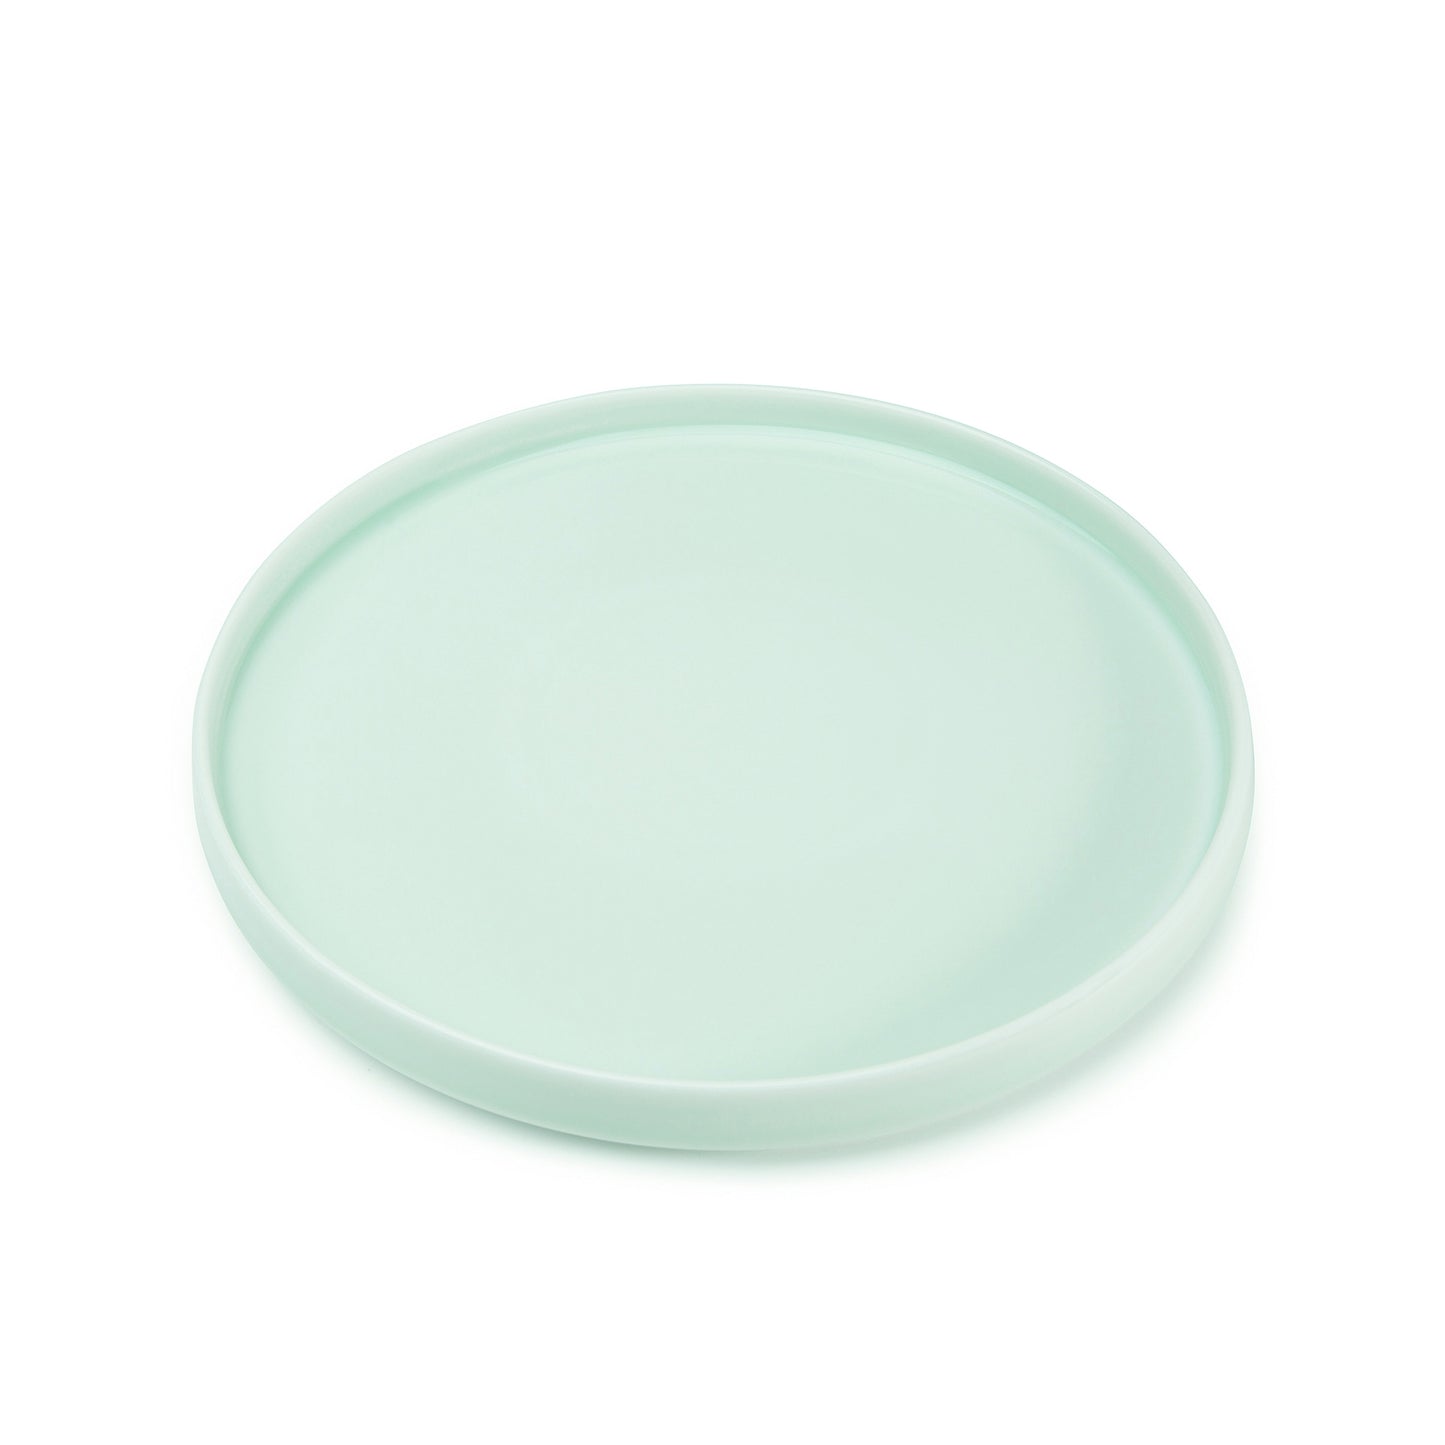 11" green celadon porcelain straight-sided dinner plate, 60 degree angle view, media 4 of 5